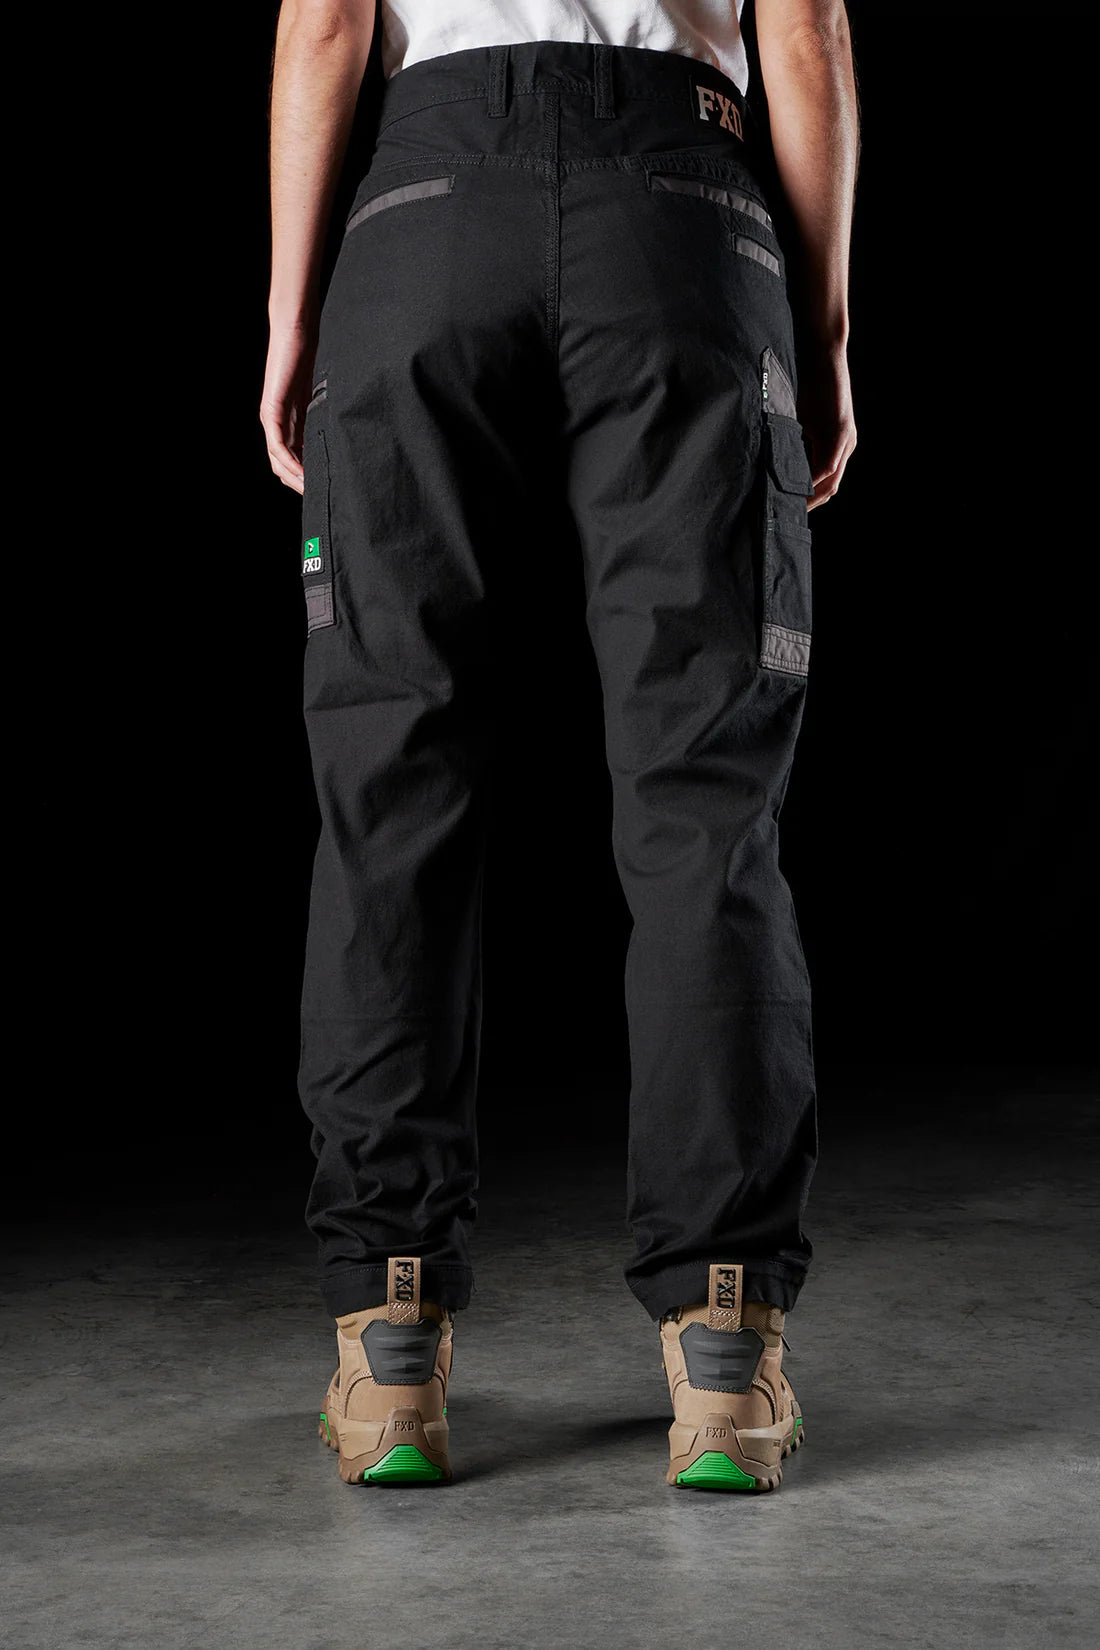 Ladies Stretch Work Pants - made by FXD Workwear